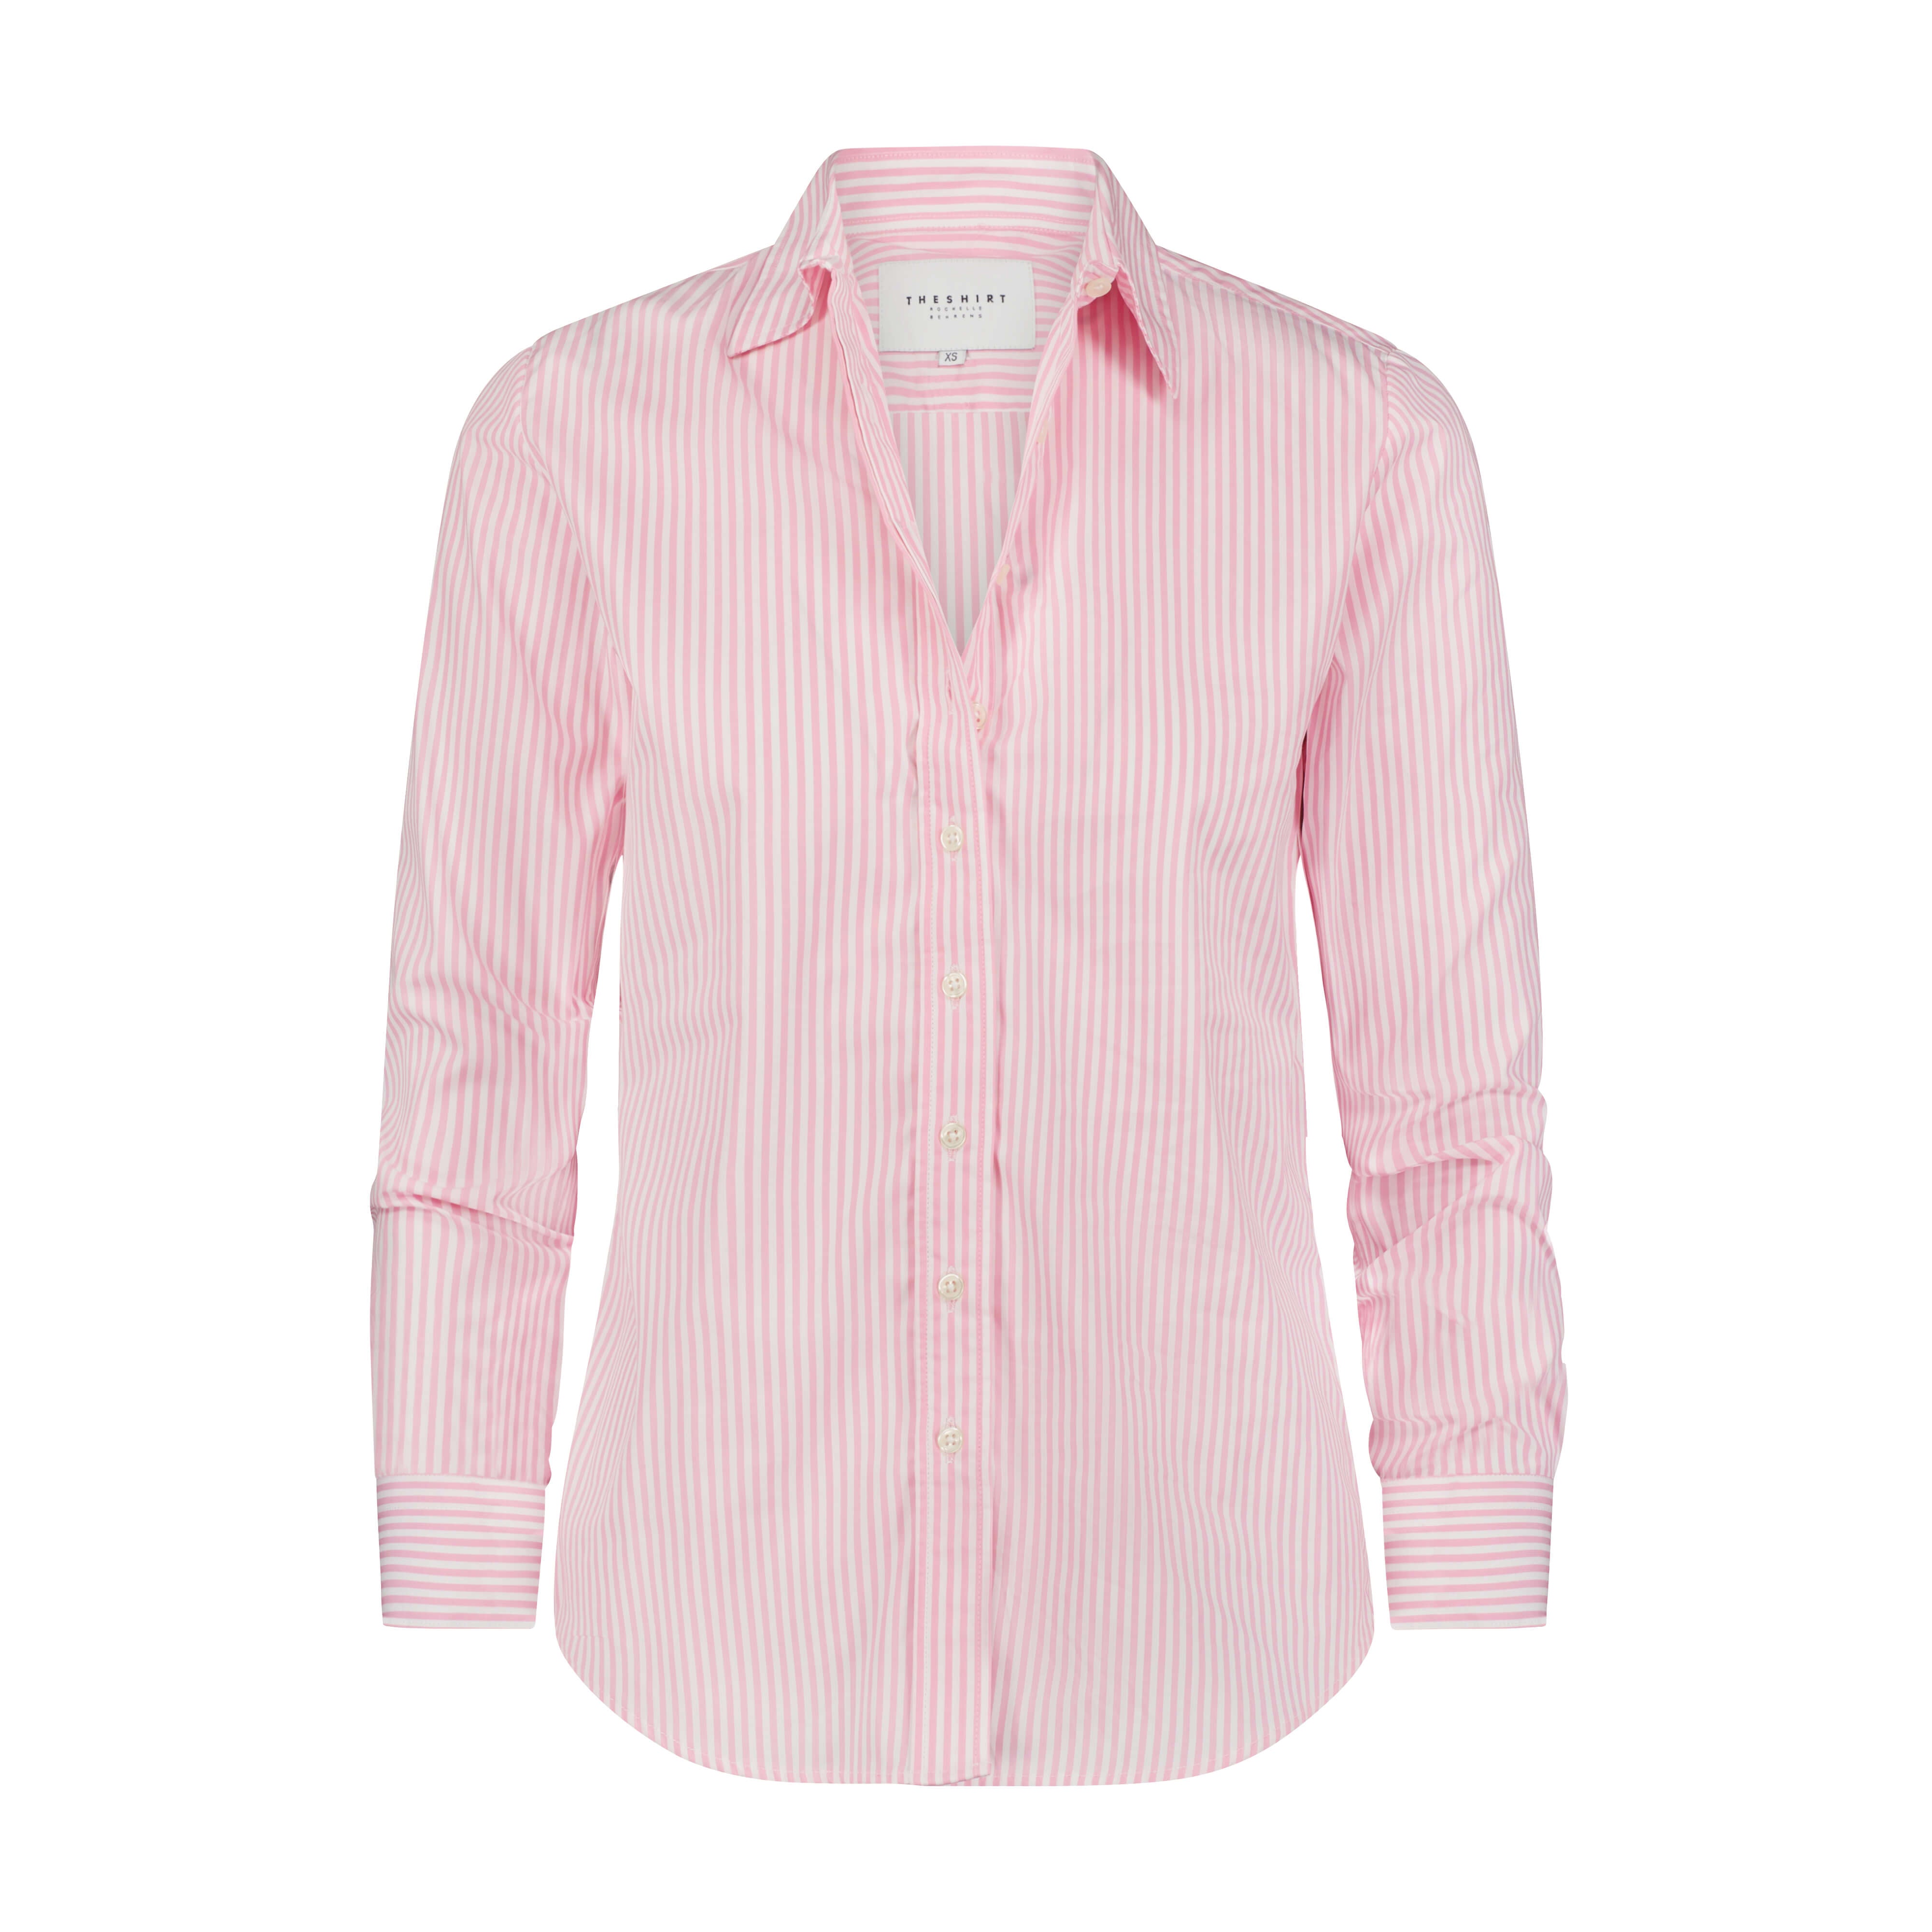 The Shirt by Rochelle Behrens - The Icon Shirt in Stripe - Pink/White